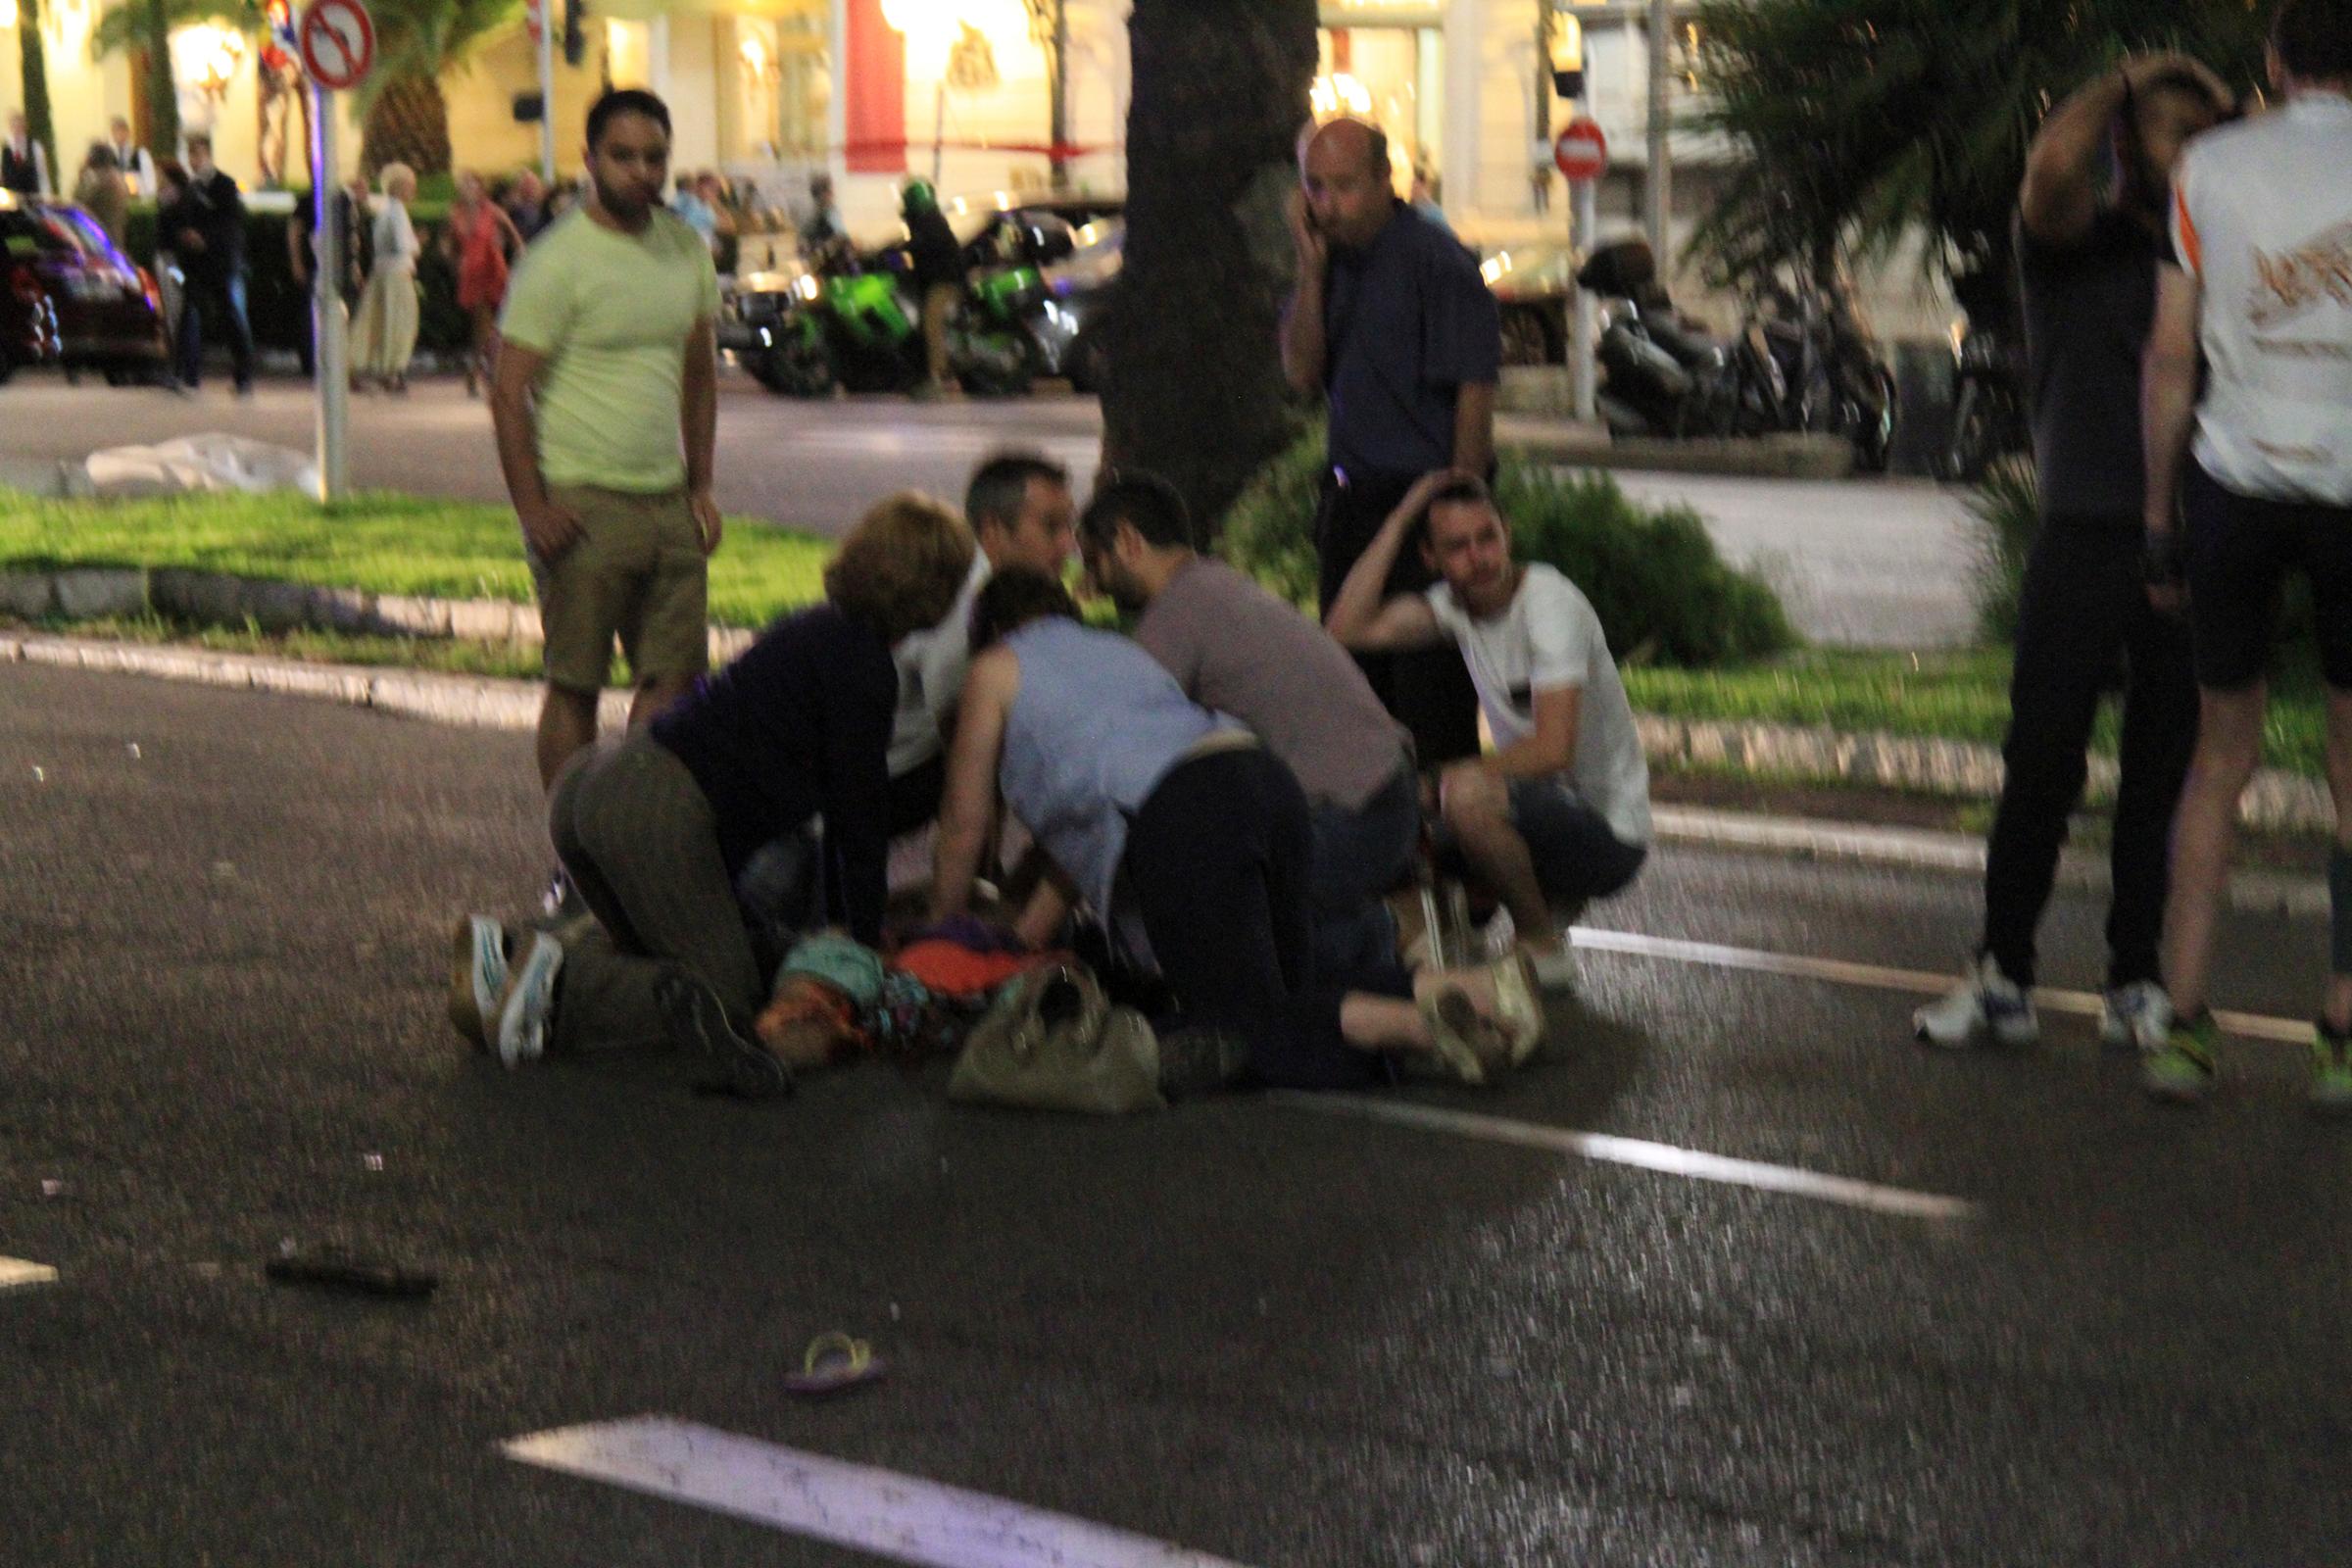 Bystanders tend to victims after a terrorist attack in Nice, France, that left 77 dead and many more injured, July 14, 2016